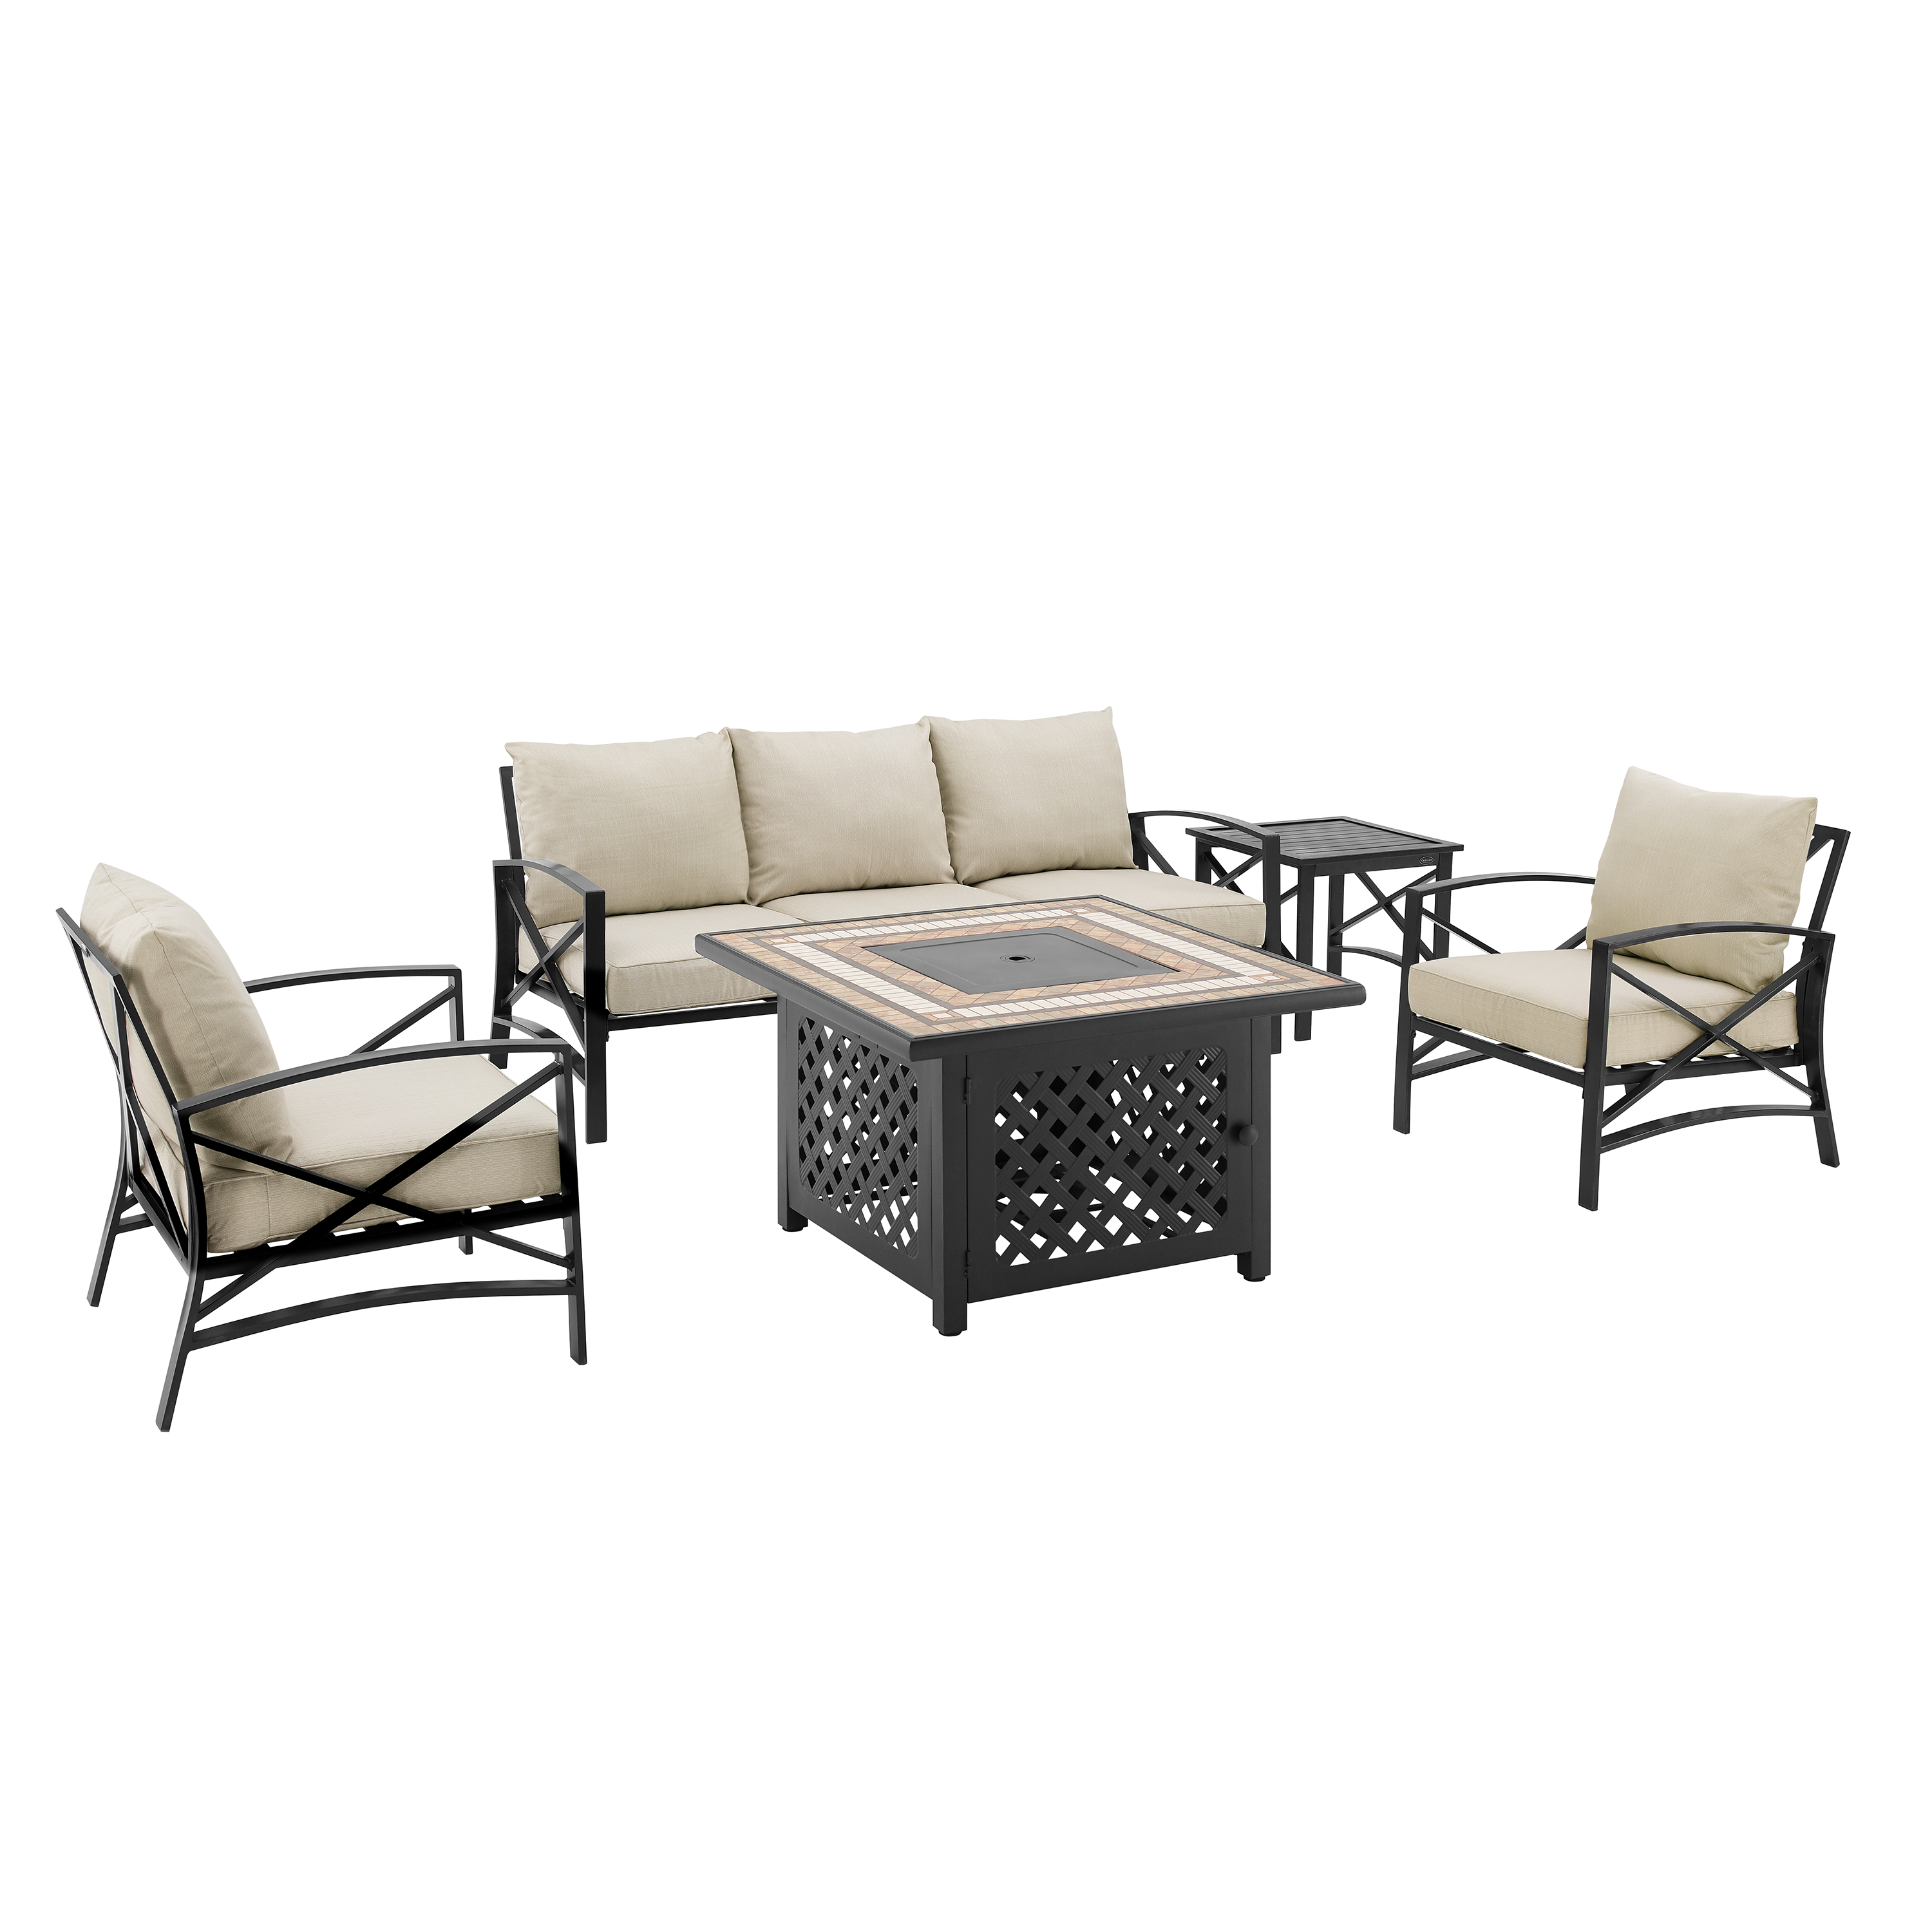 Crosley Furniture Kaplan Oil Rubbed Bronze/Oatmeal 5 Piece Outdoor Sofa Set with Fire Table - image 2 of 13